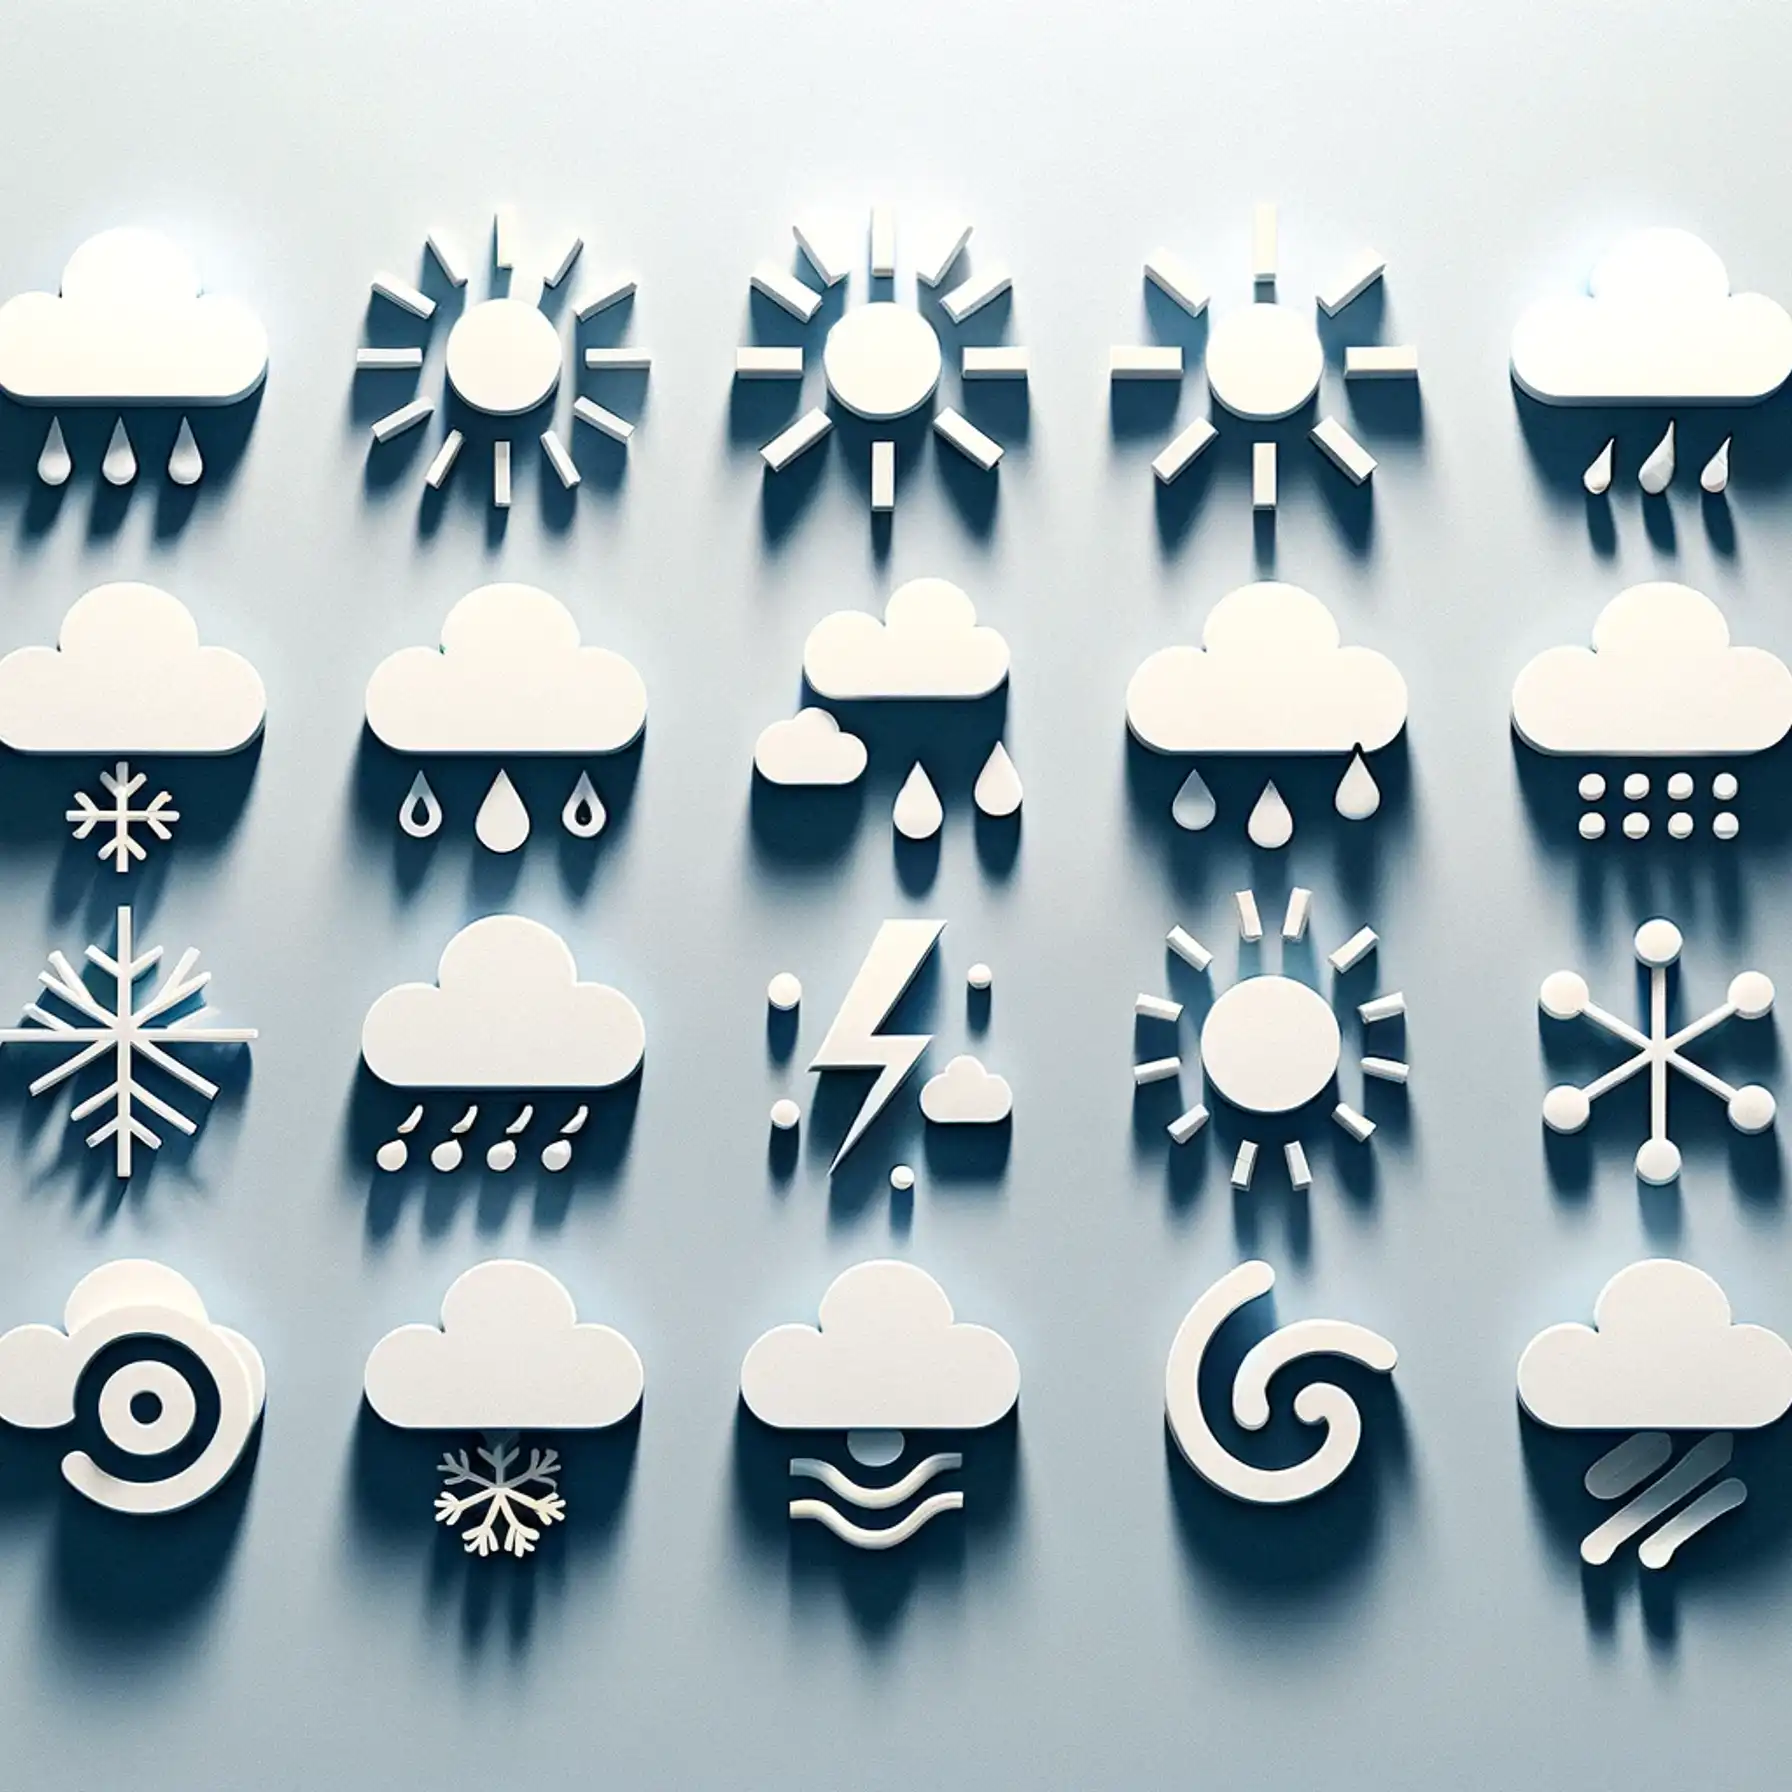 What Do the Different Weather Symbols Mean?